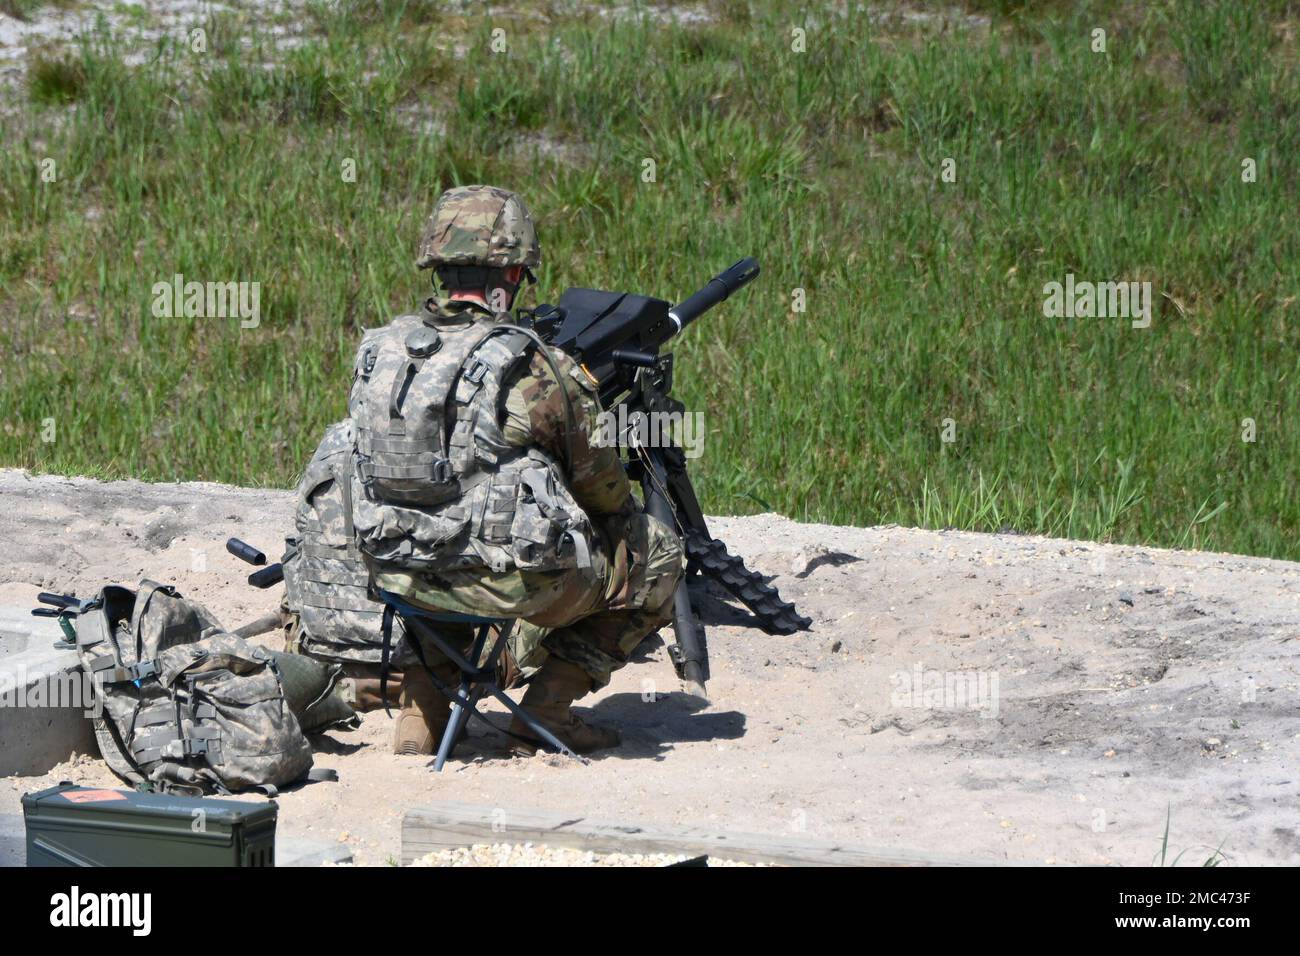 These soldiers are from Vermont Army National Guard 572nd BEB (Brigade Engineer Battalion). They are training on the Fort Dix Range Complex at Range 40. They are completing the M2HB and MK19 Qualification training. (Photos taken by the Fort Dix [TSC] Training Support Center) Stock Photo